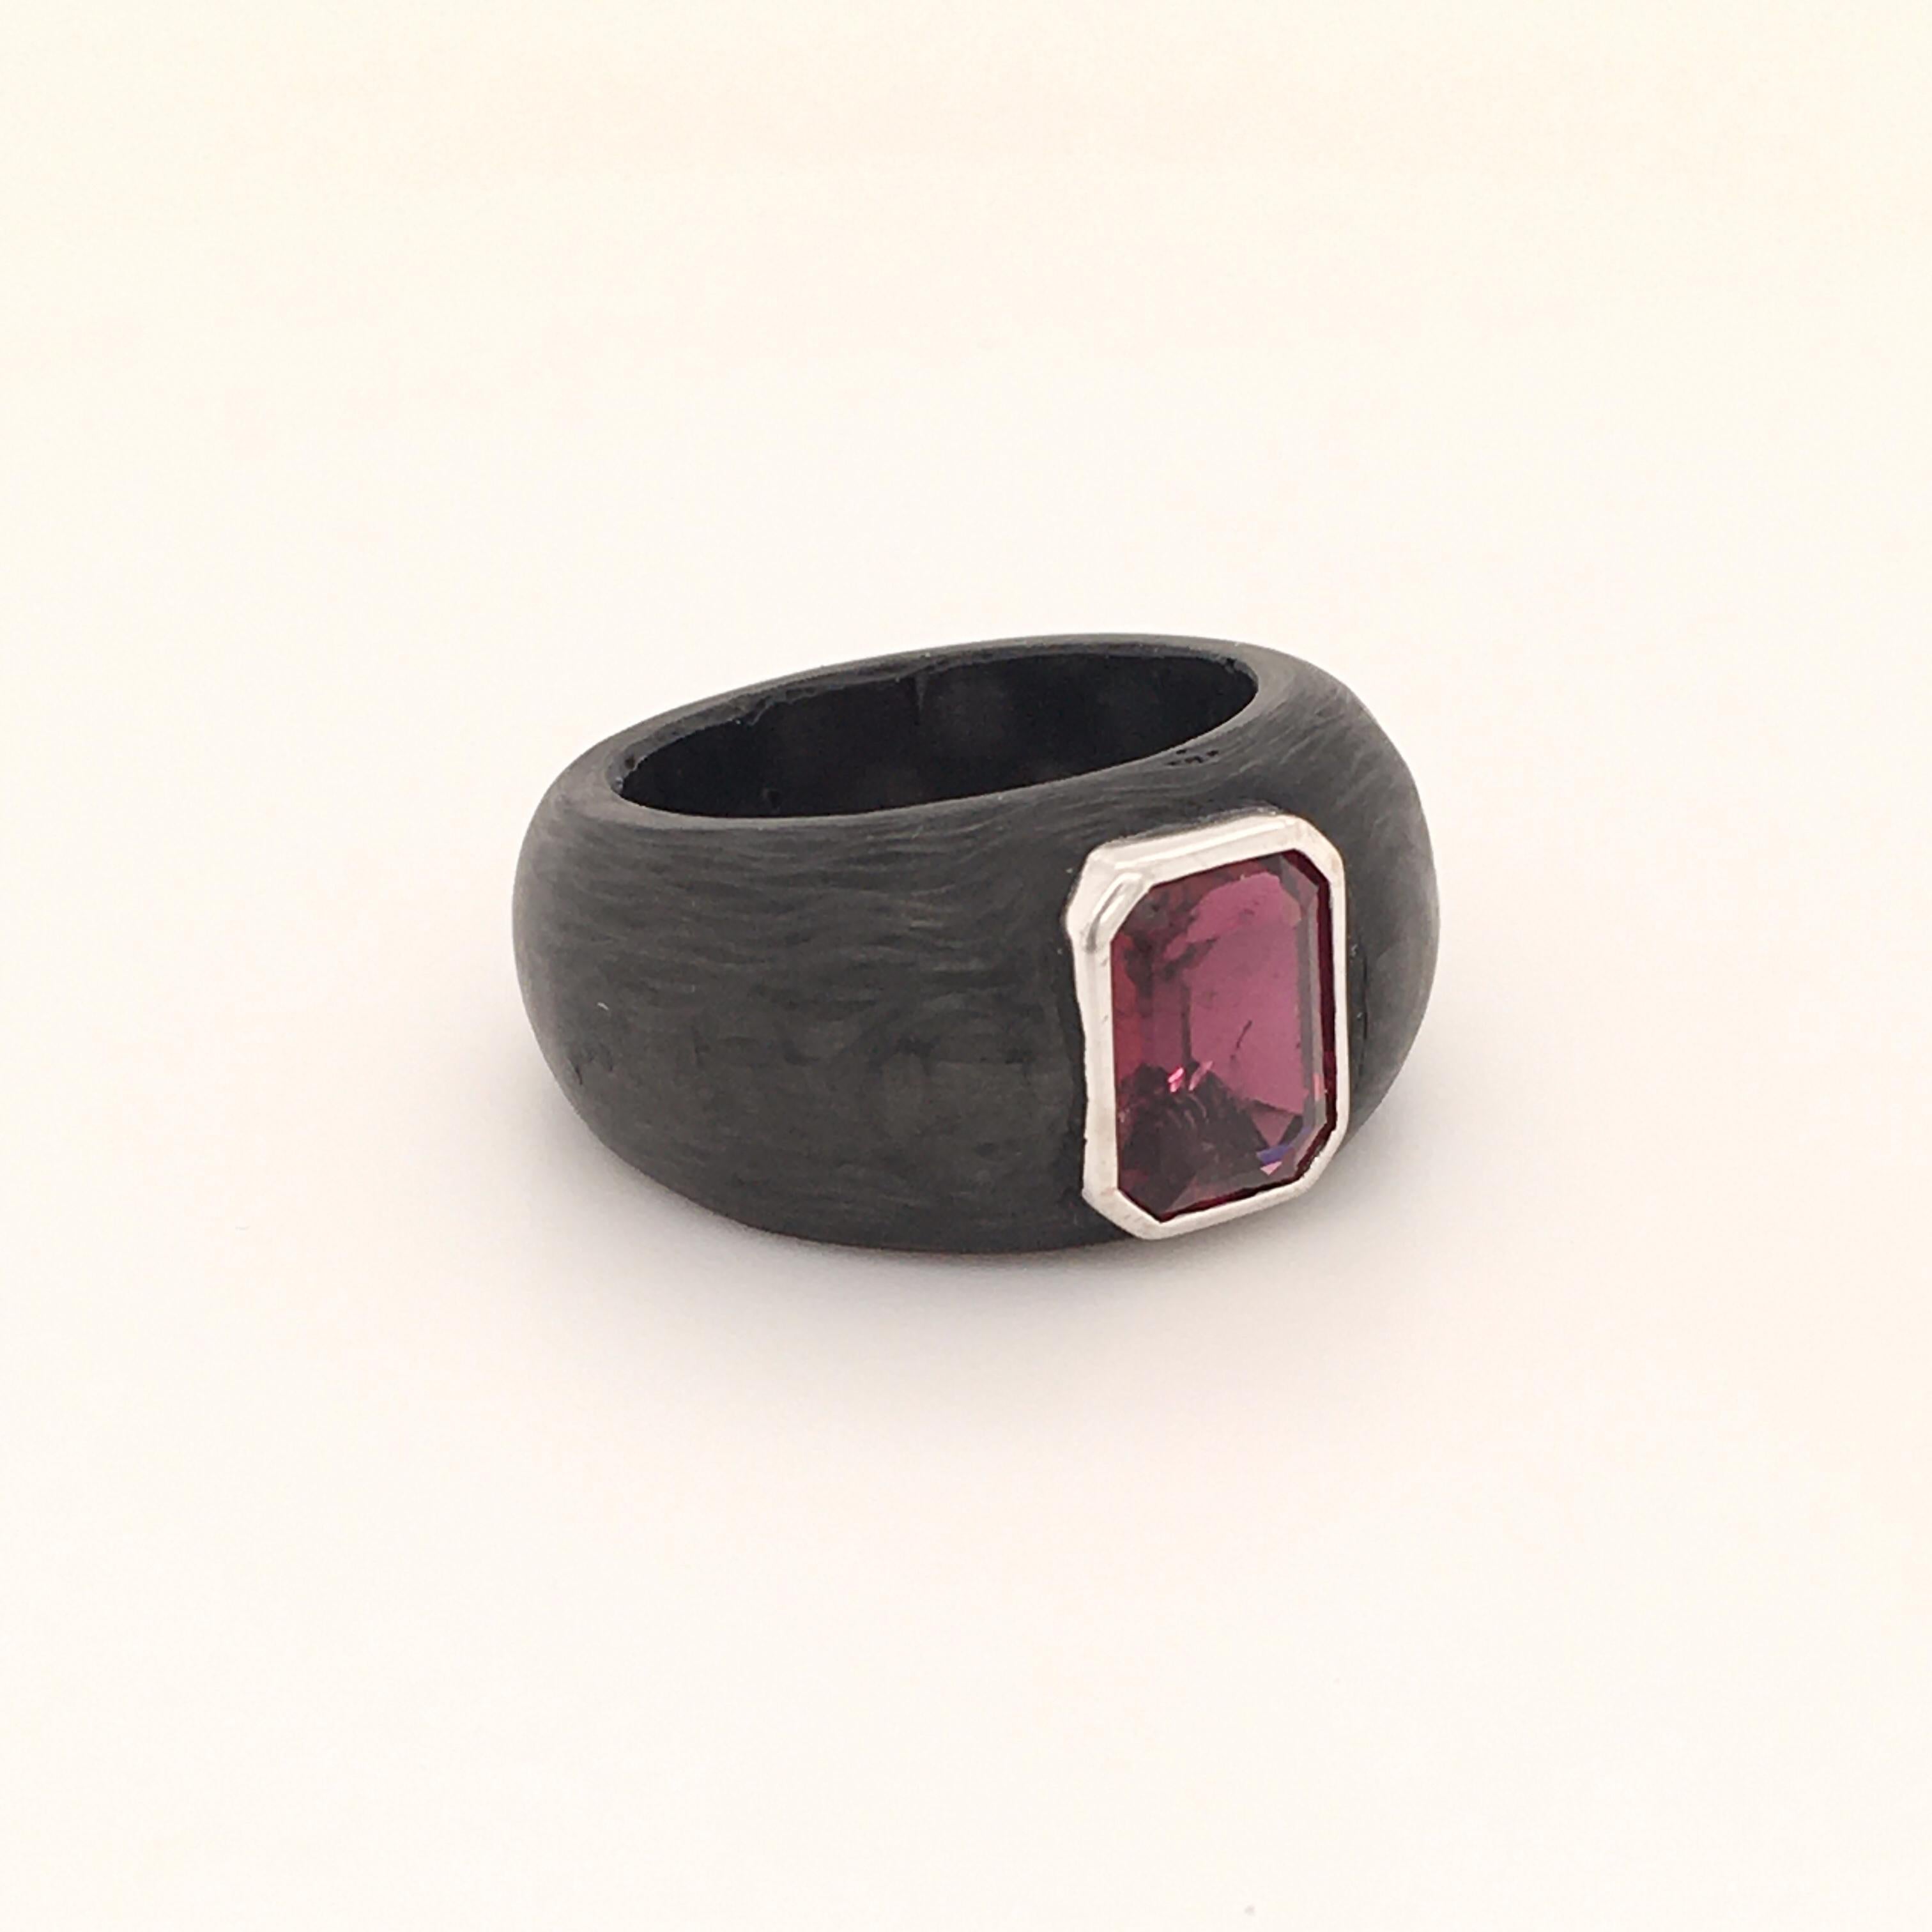 This sleek and modern ring in carbon and 18 karat white gold is set with an octagonal-cut dark pink tourmaline of approximately 2.10 carats.
Timelessly beautiful and very comfortable to wear thanks to its light weight and soft surface.

Ring size: